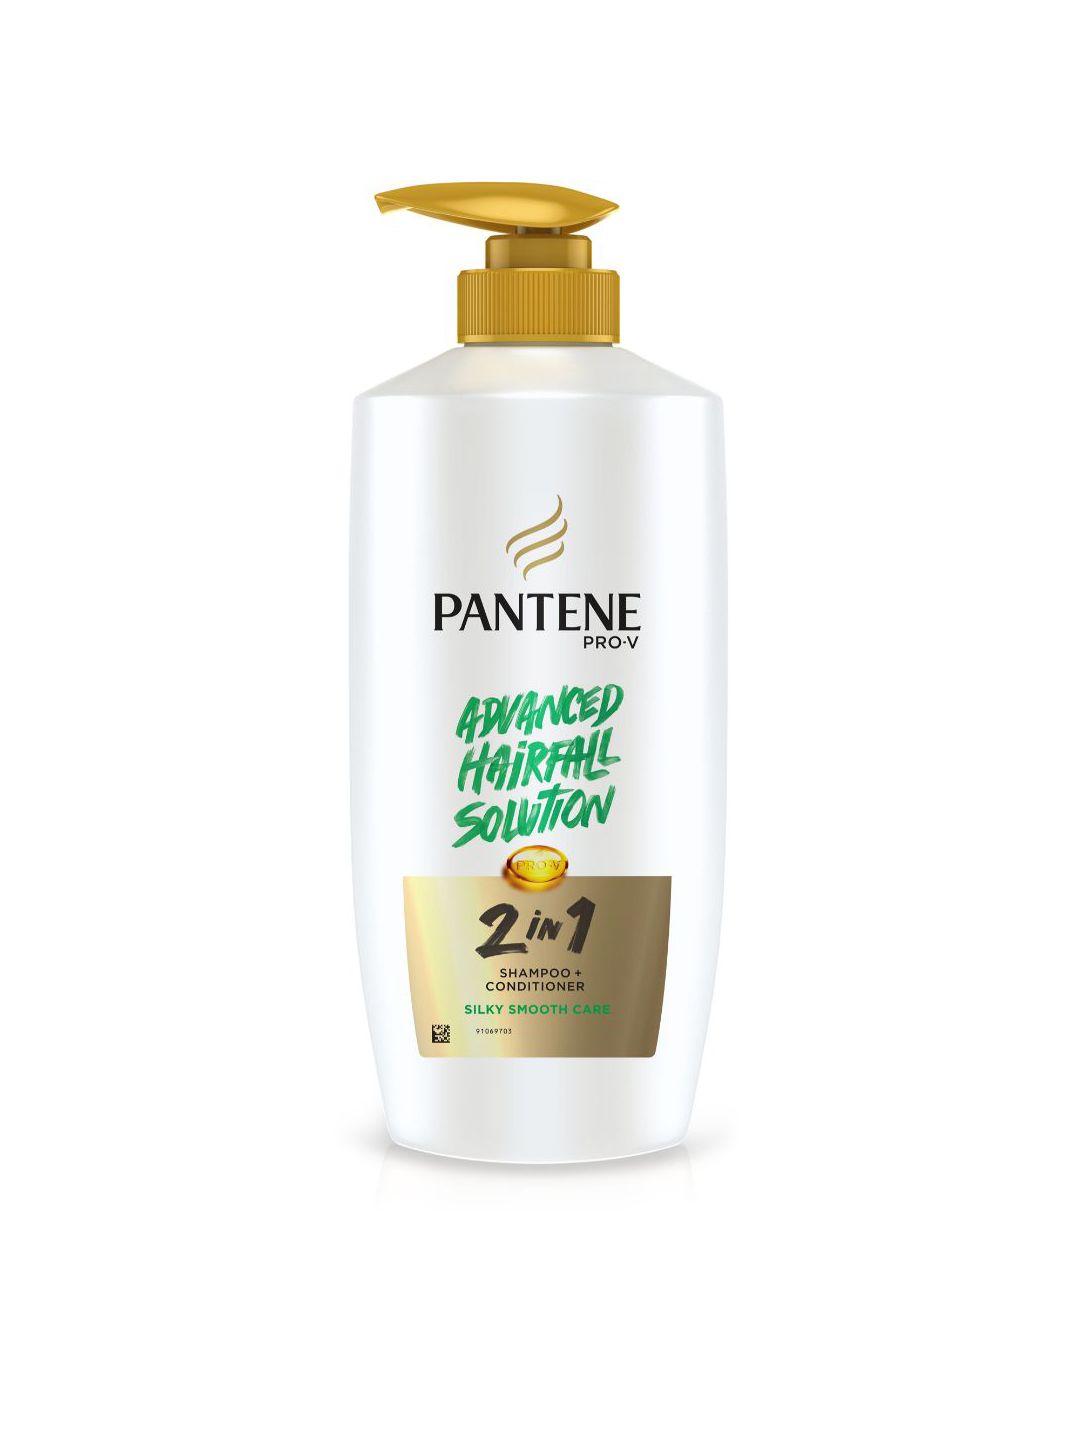 Pantene Women Advanced Hairfall Solution 2 in 1 Shampoo + Conditioner 650 ml Price in India